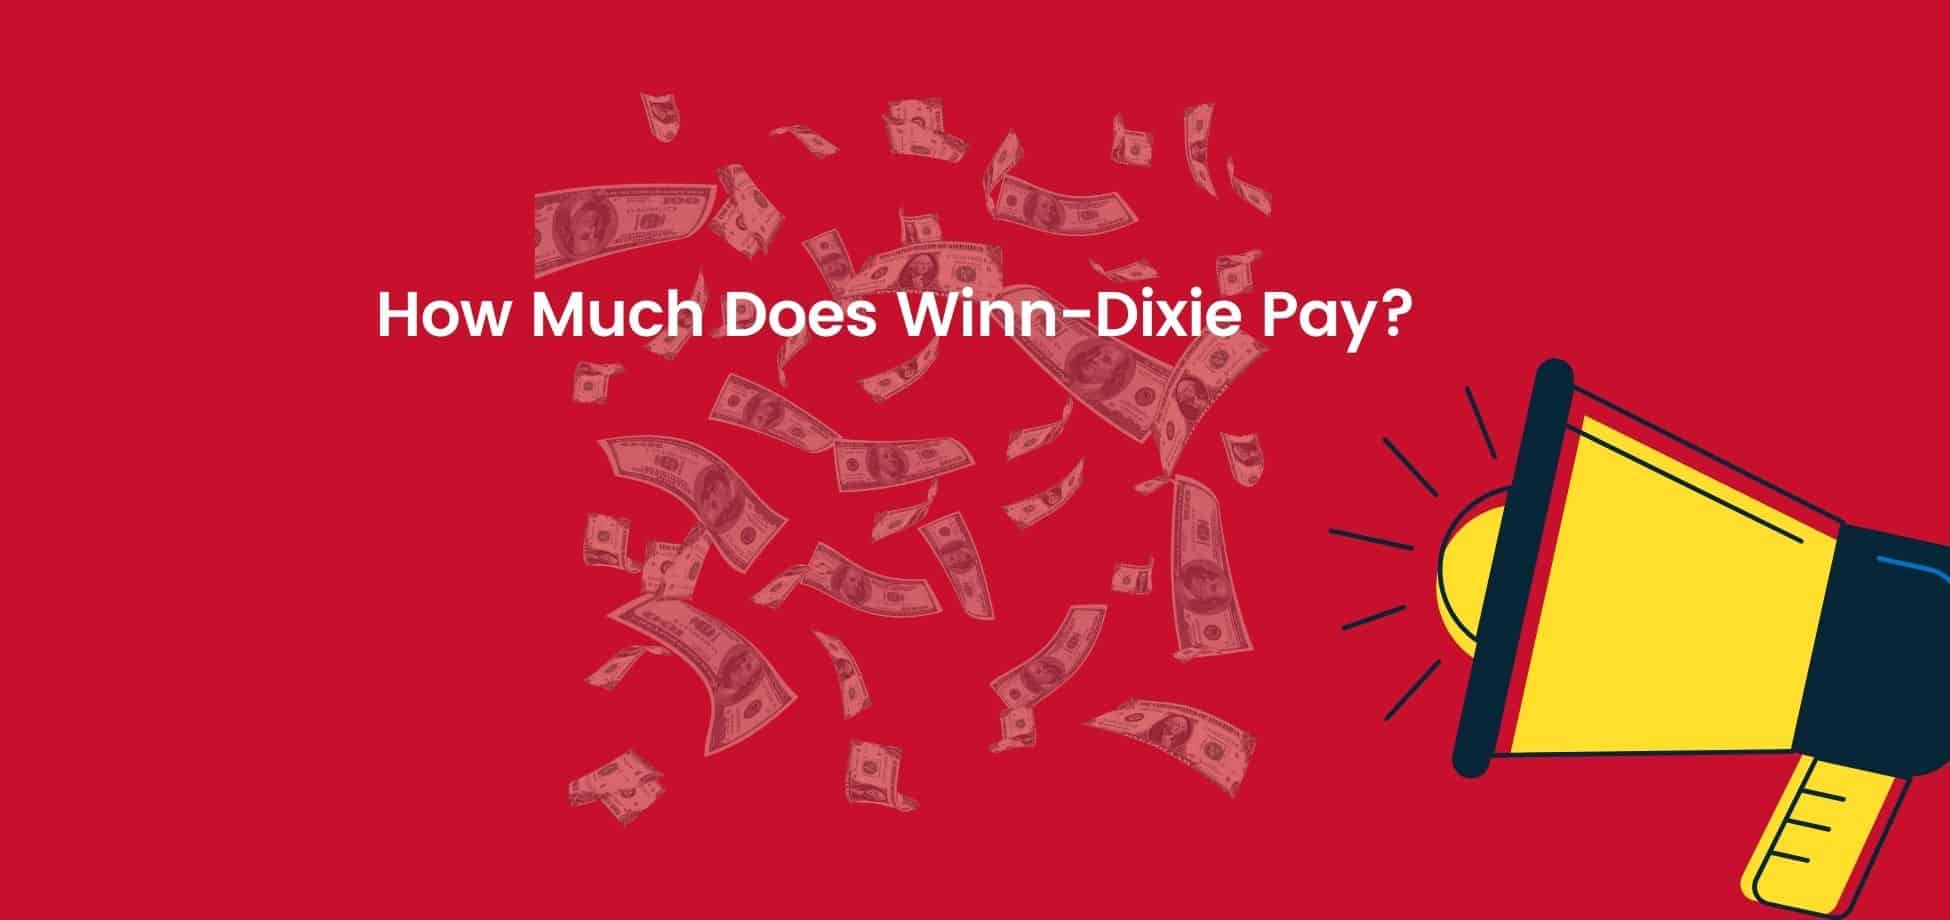 Winn-Dixie salaries are generally below average for the supermarket retail industry.